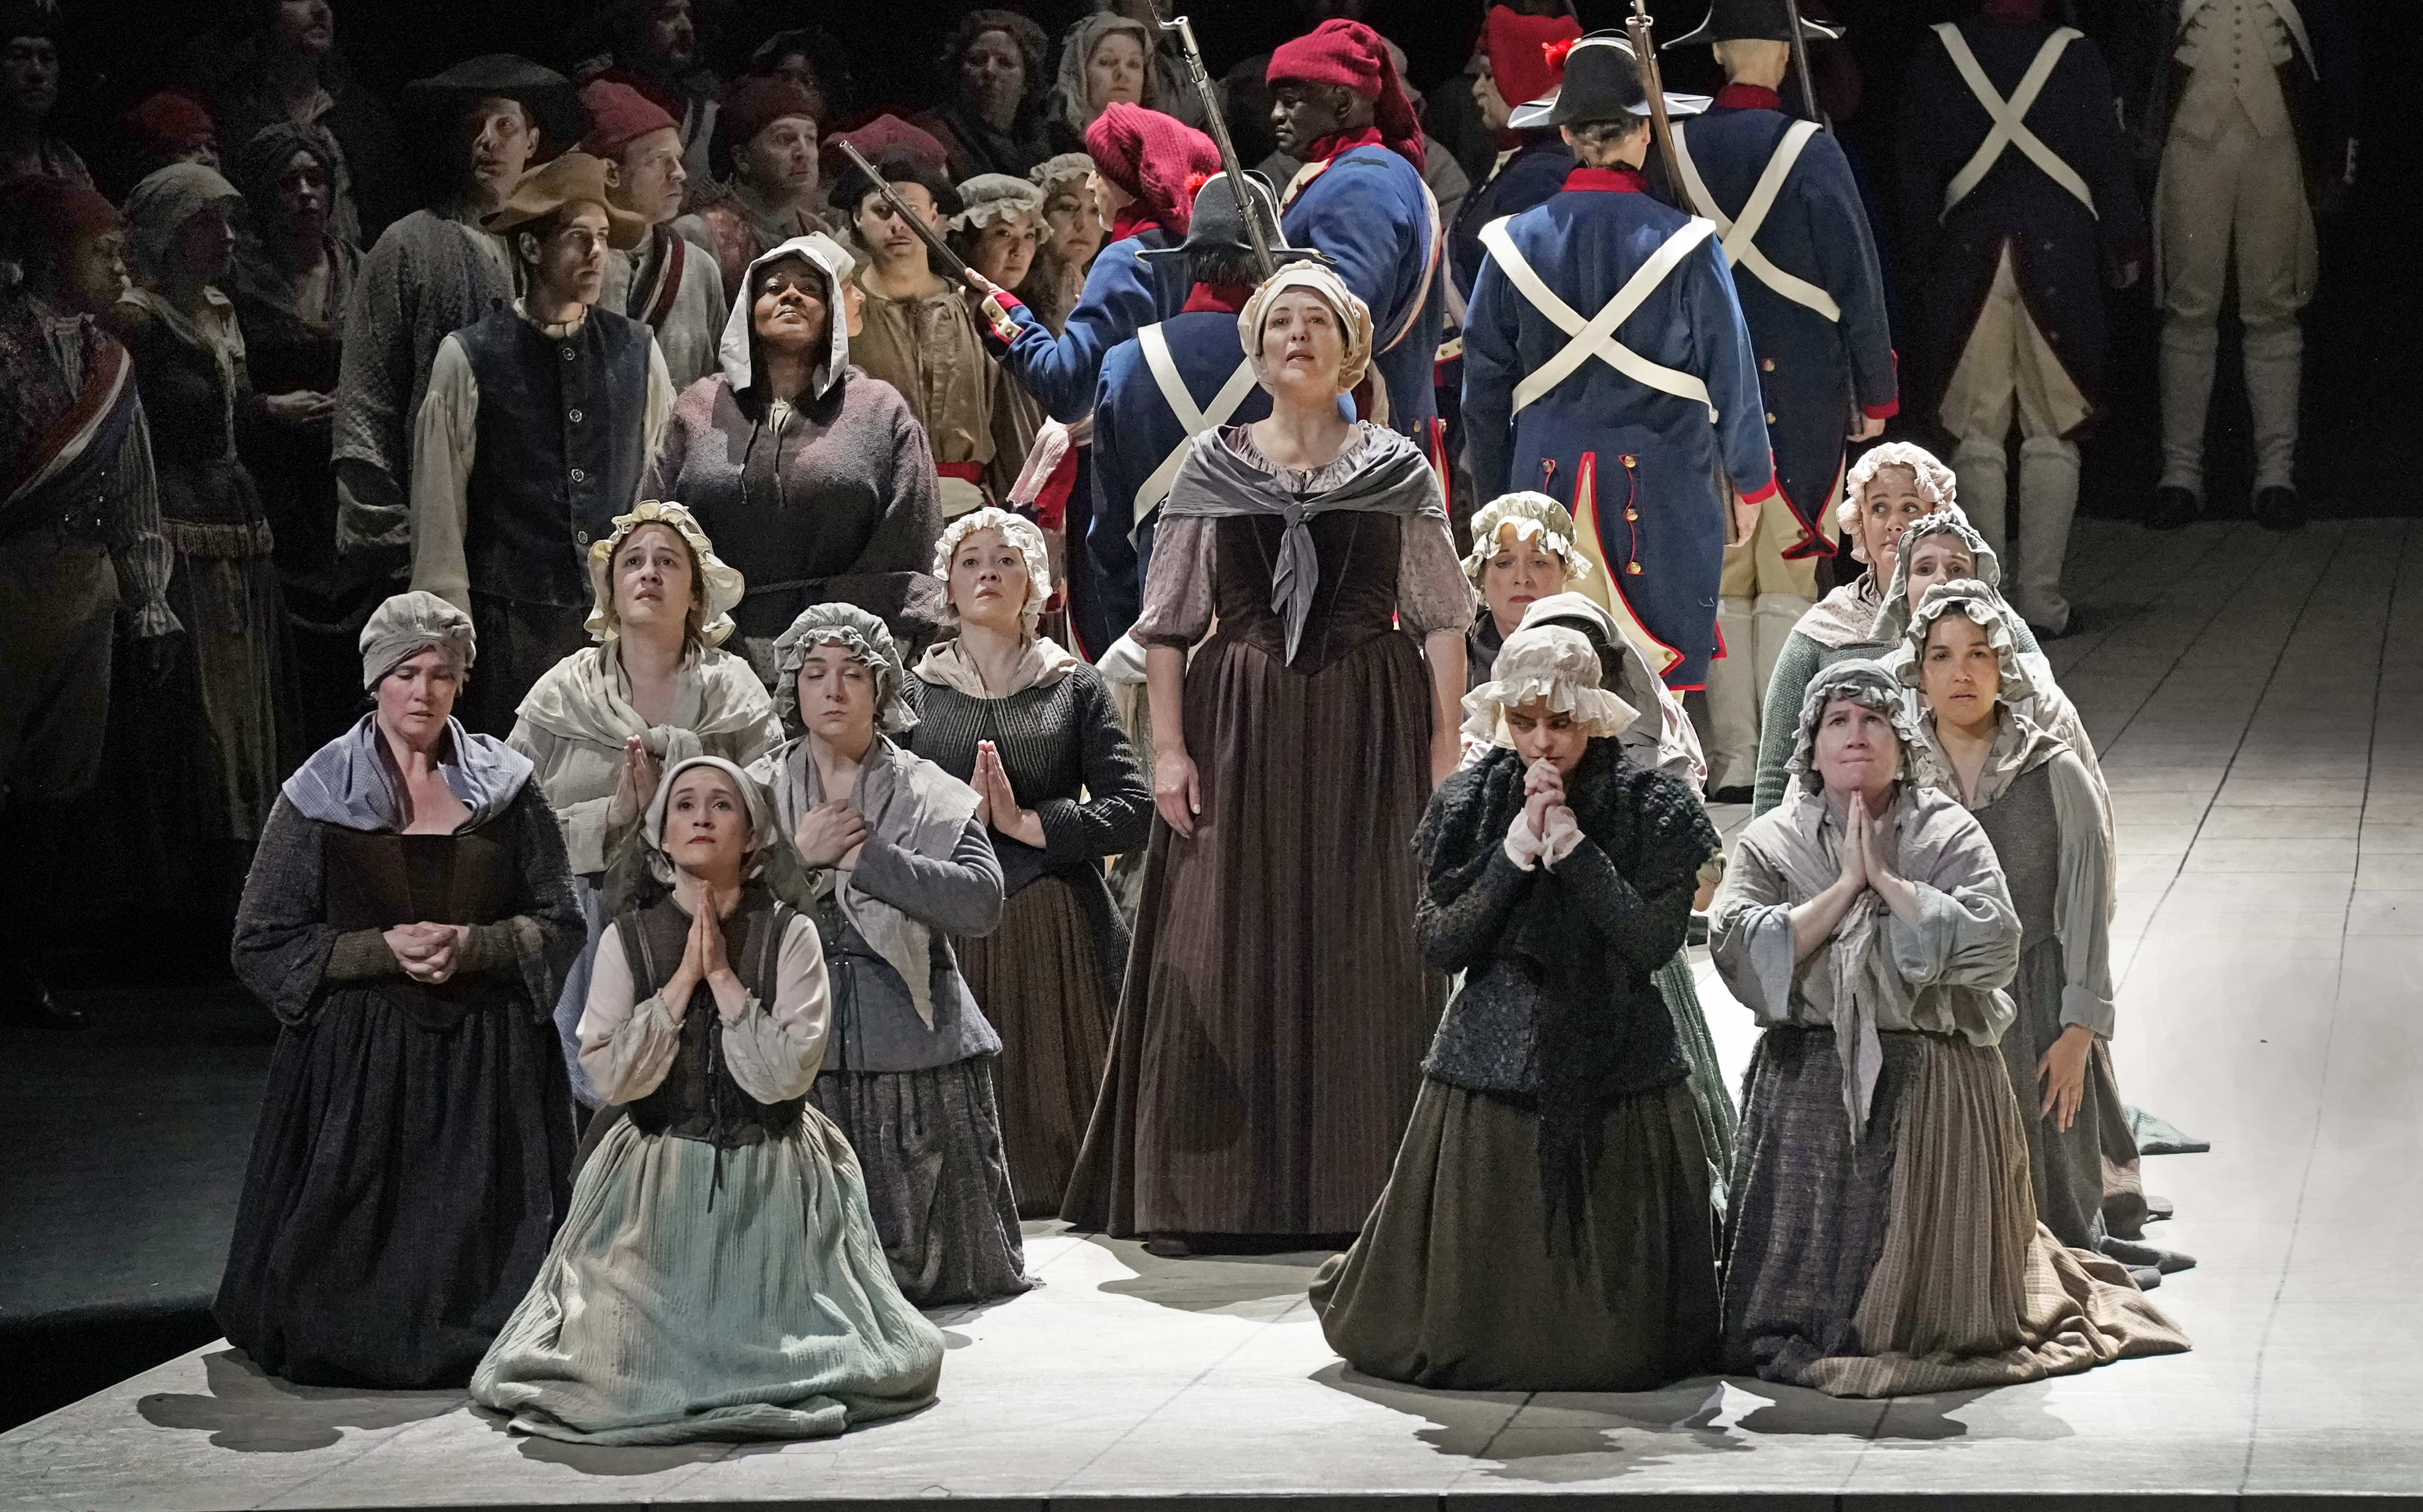 A scene from Act III of Dialogues of the Carmelites at The Met